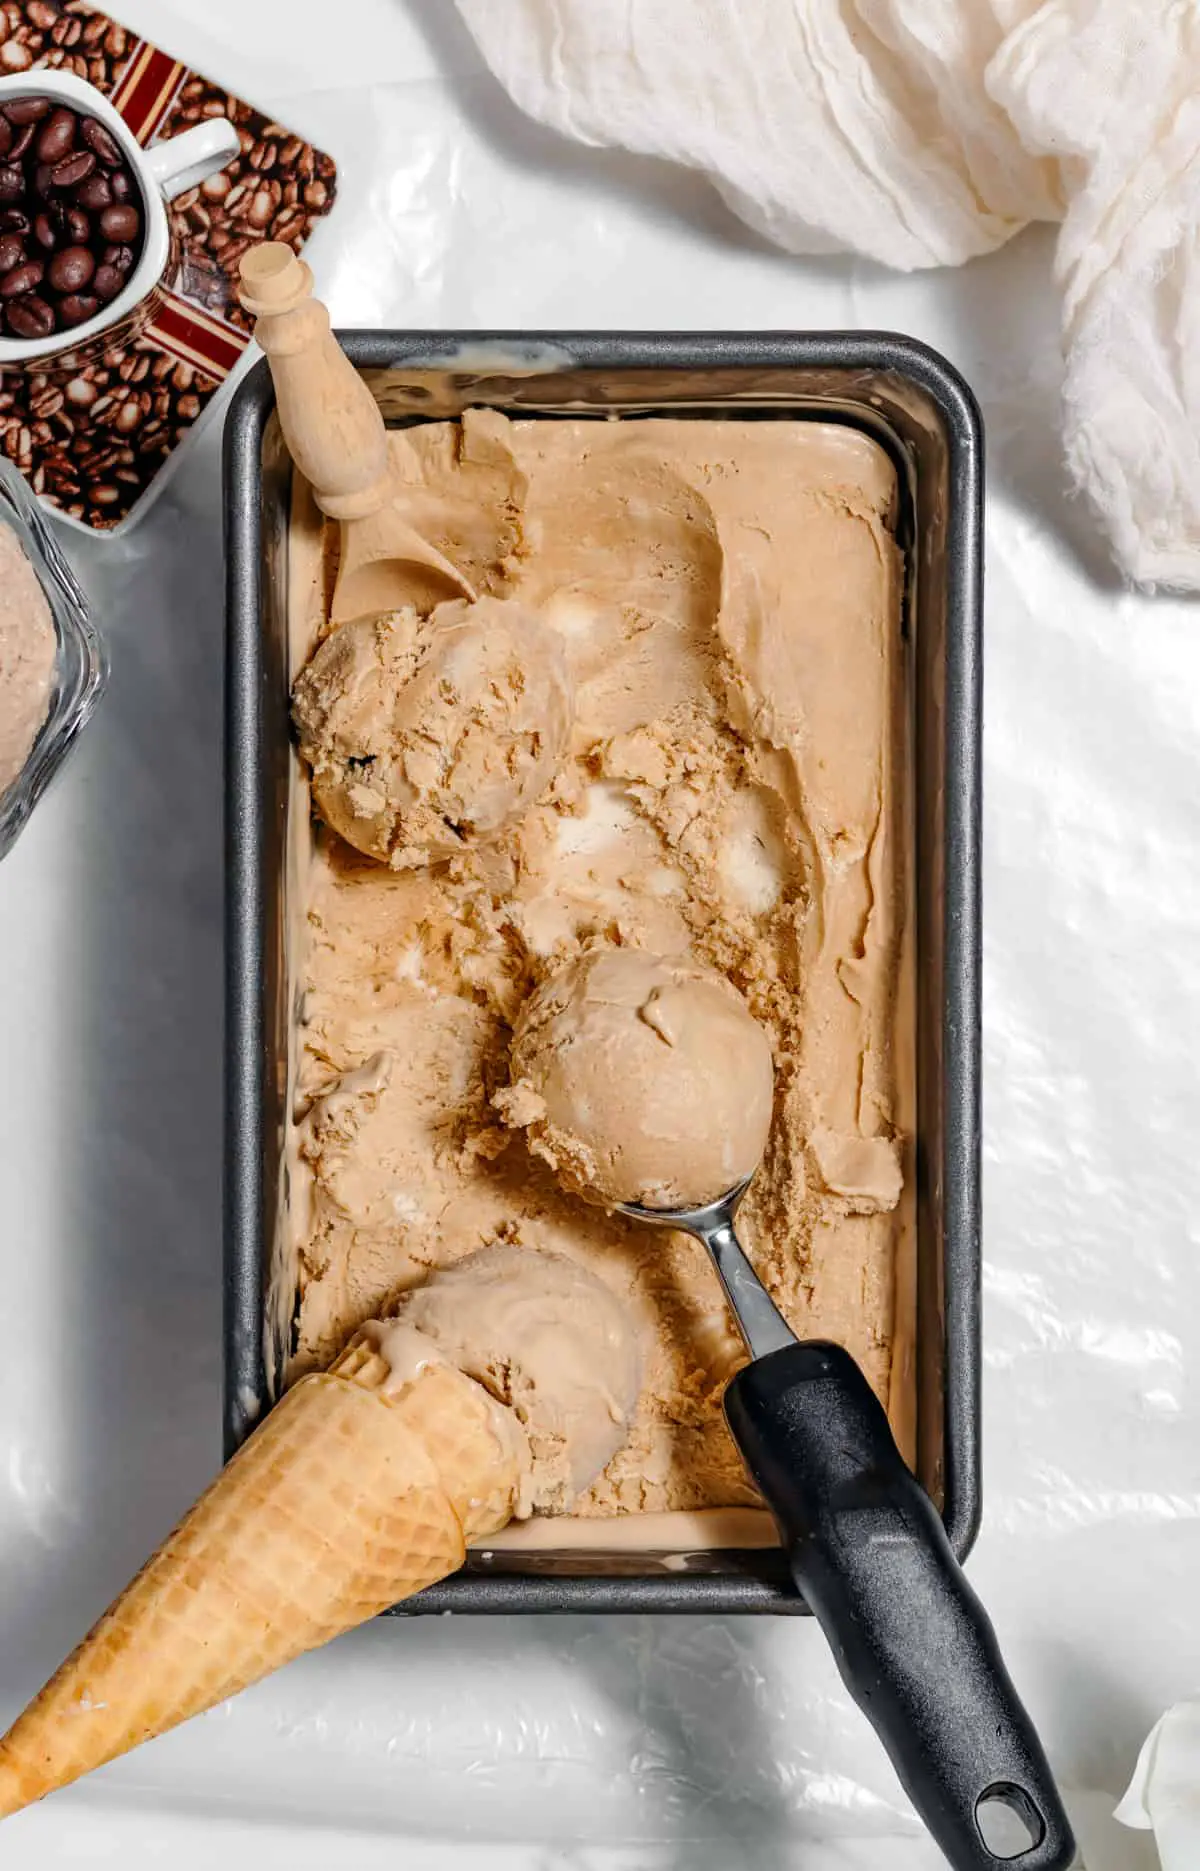 Scooping ice cream from loaf pan